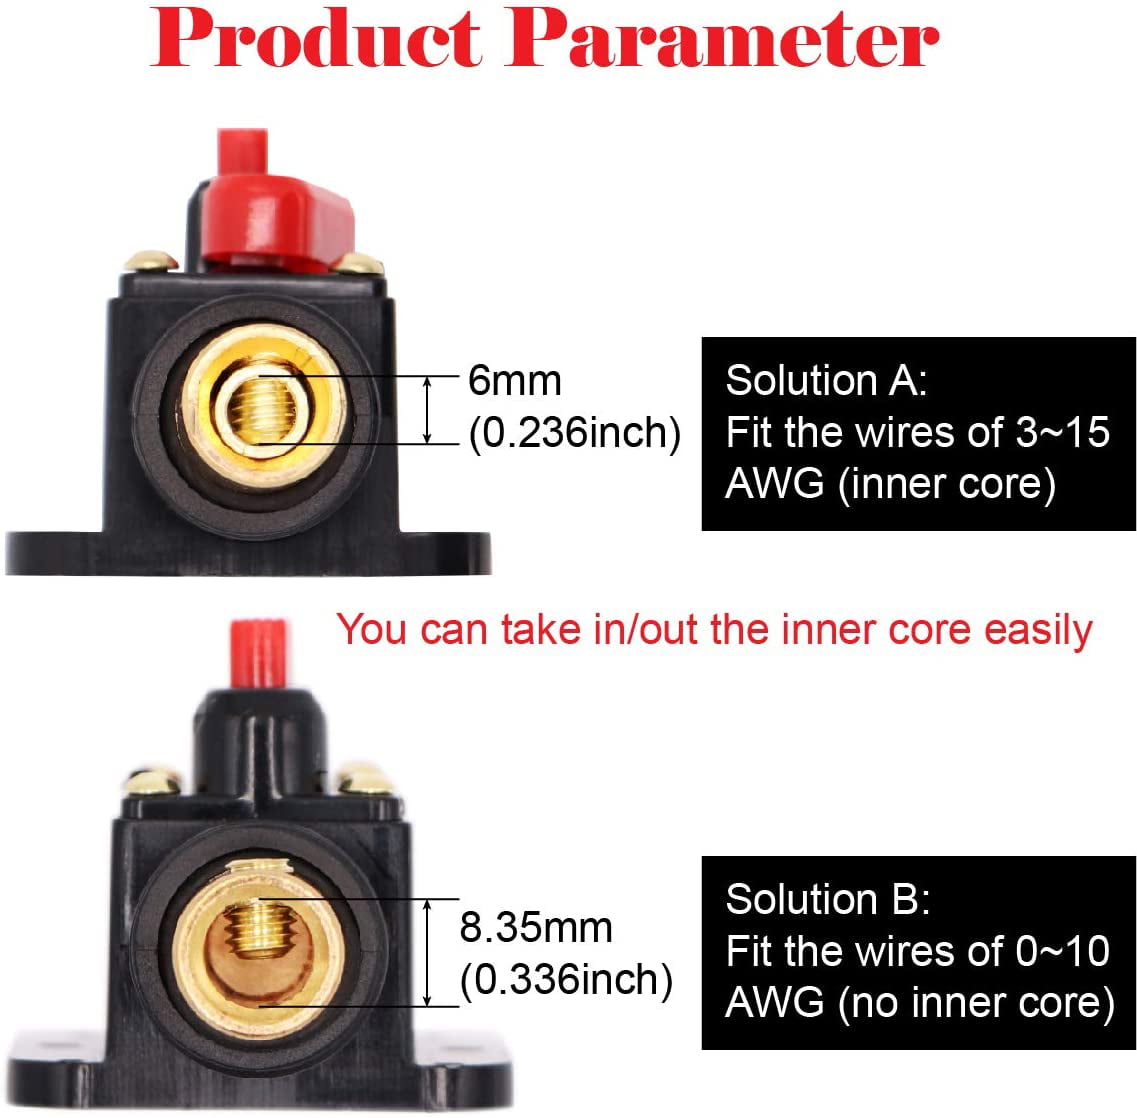 40 Amp Manual Reset Circuit Breaker With Switch Button Switch Waterproof Car Boat Fuse Holder for Car Boat Truck Bus 